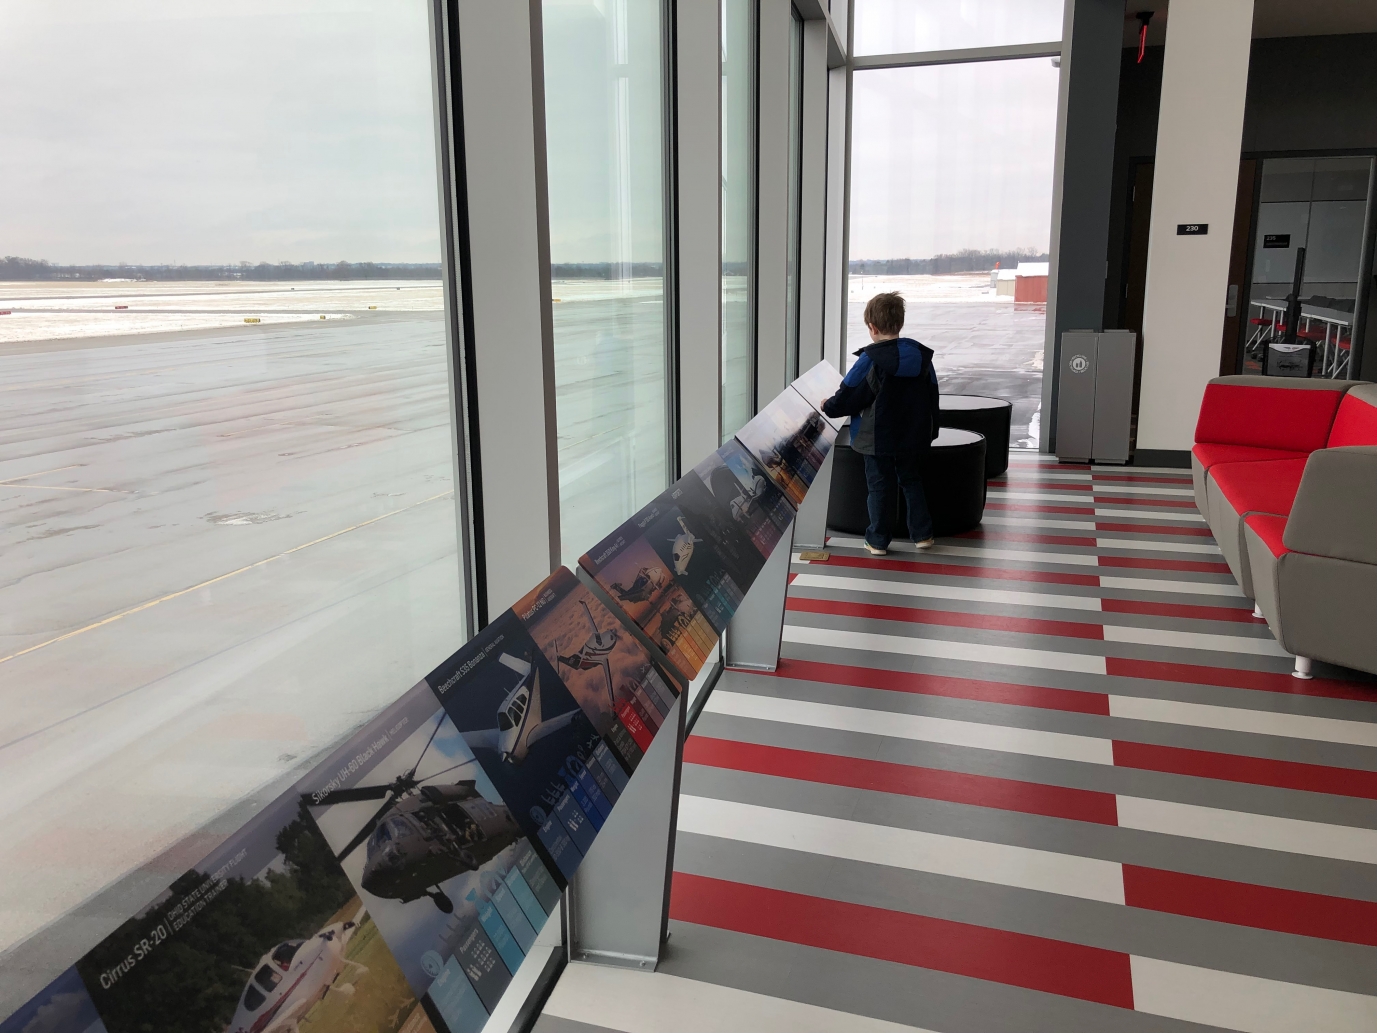 observation deck at OSU airport.